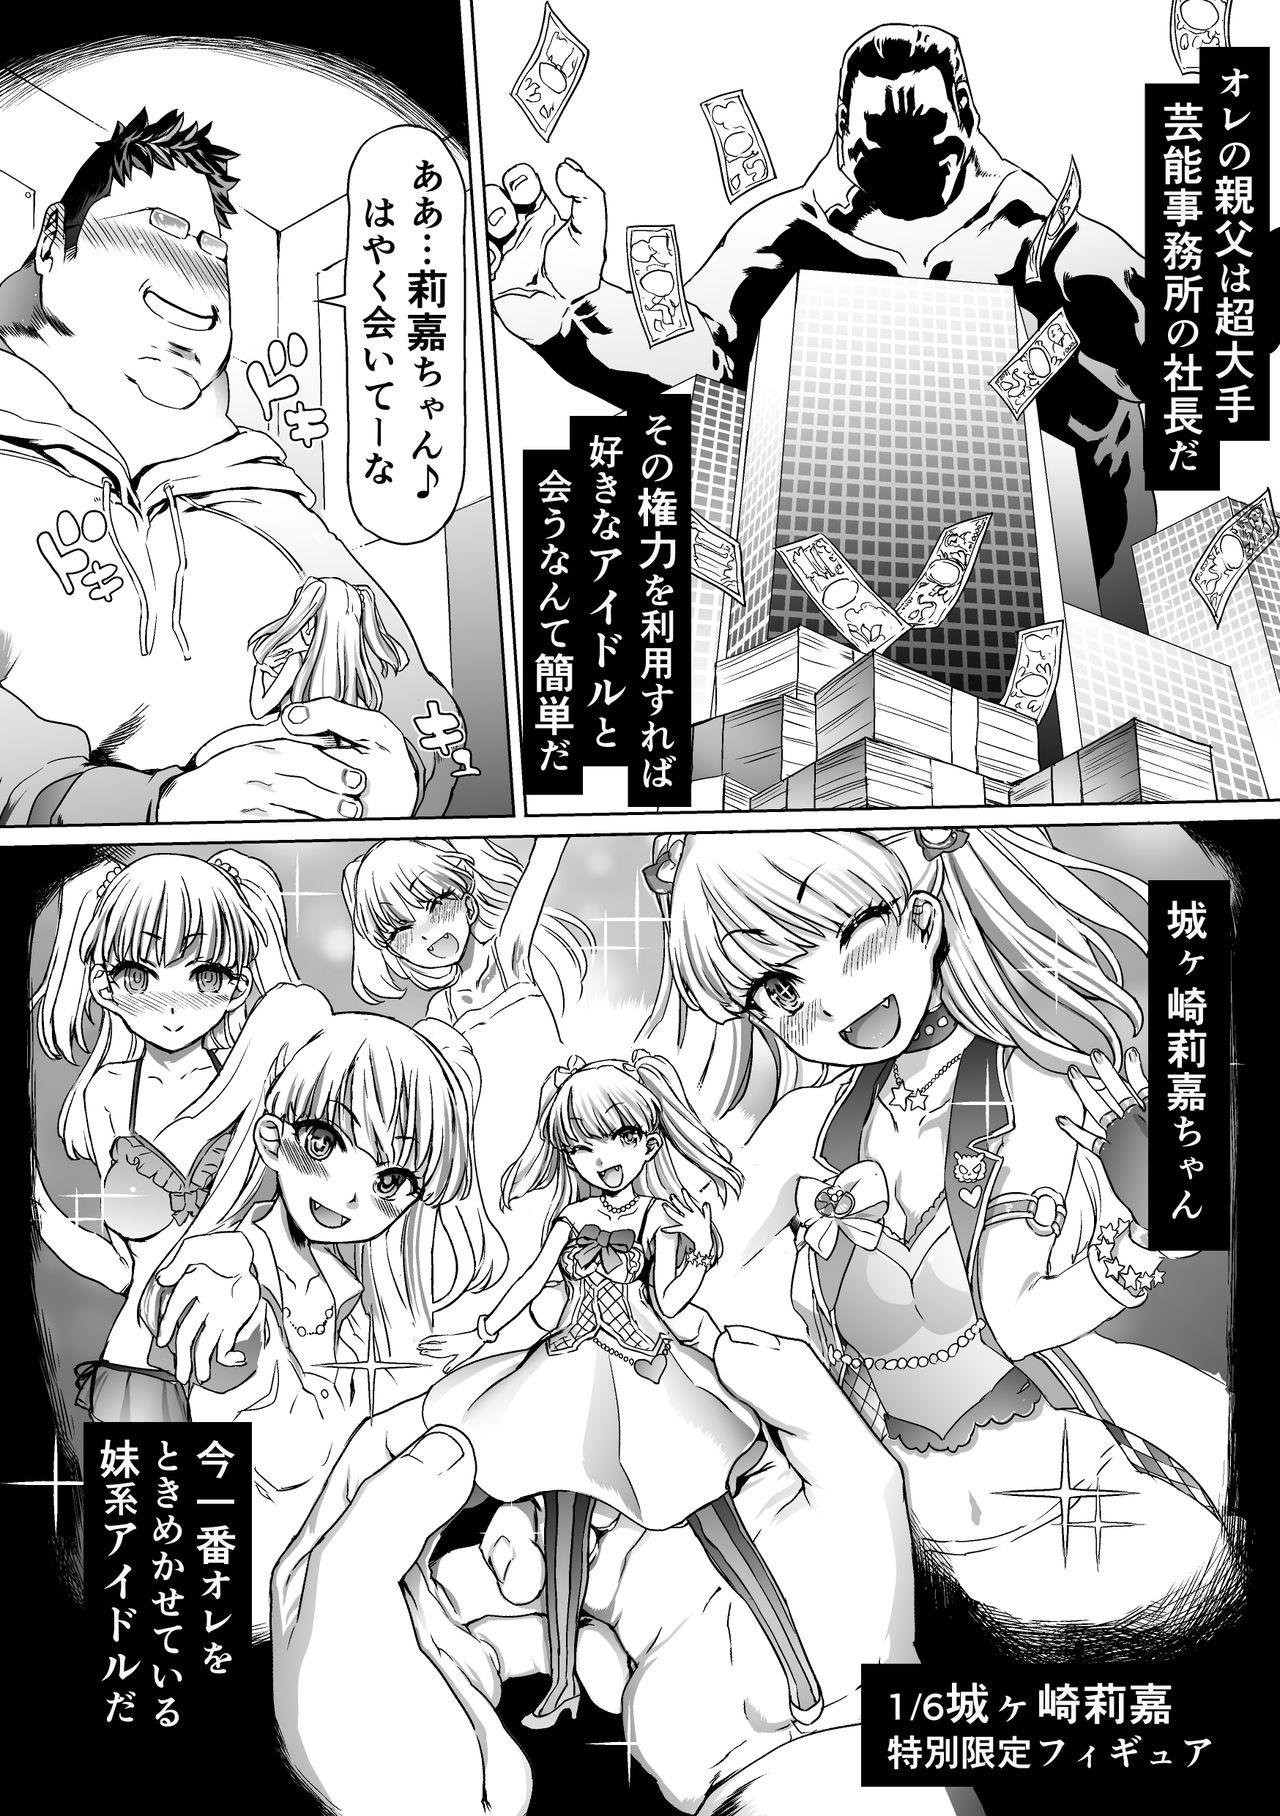 Gostosa Omake - The idolmaster Blows - Picture 2